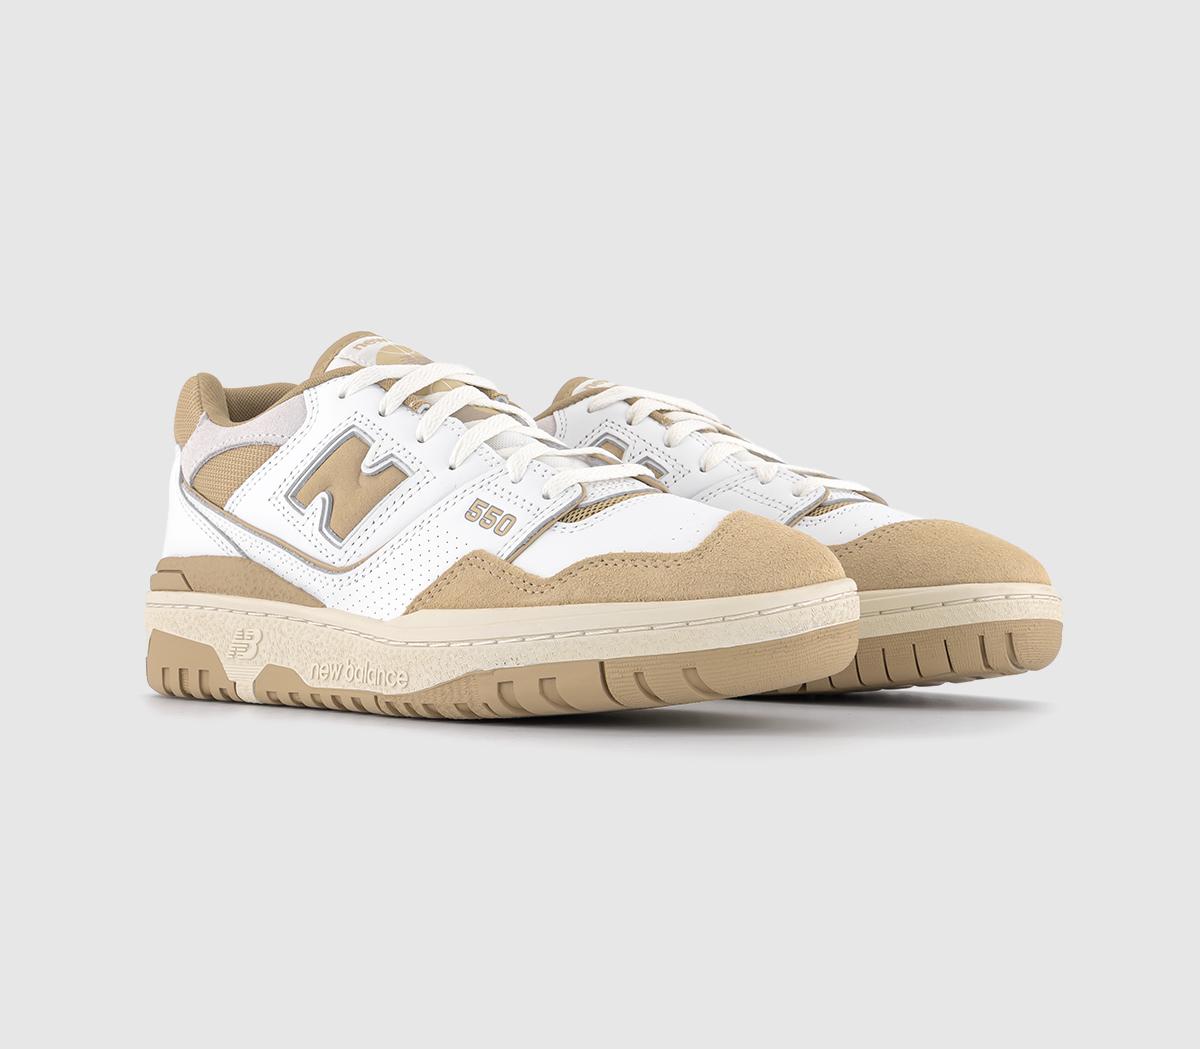 New Balance BB550 Trainers White Sand Offwhite - Unisex Sports